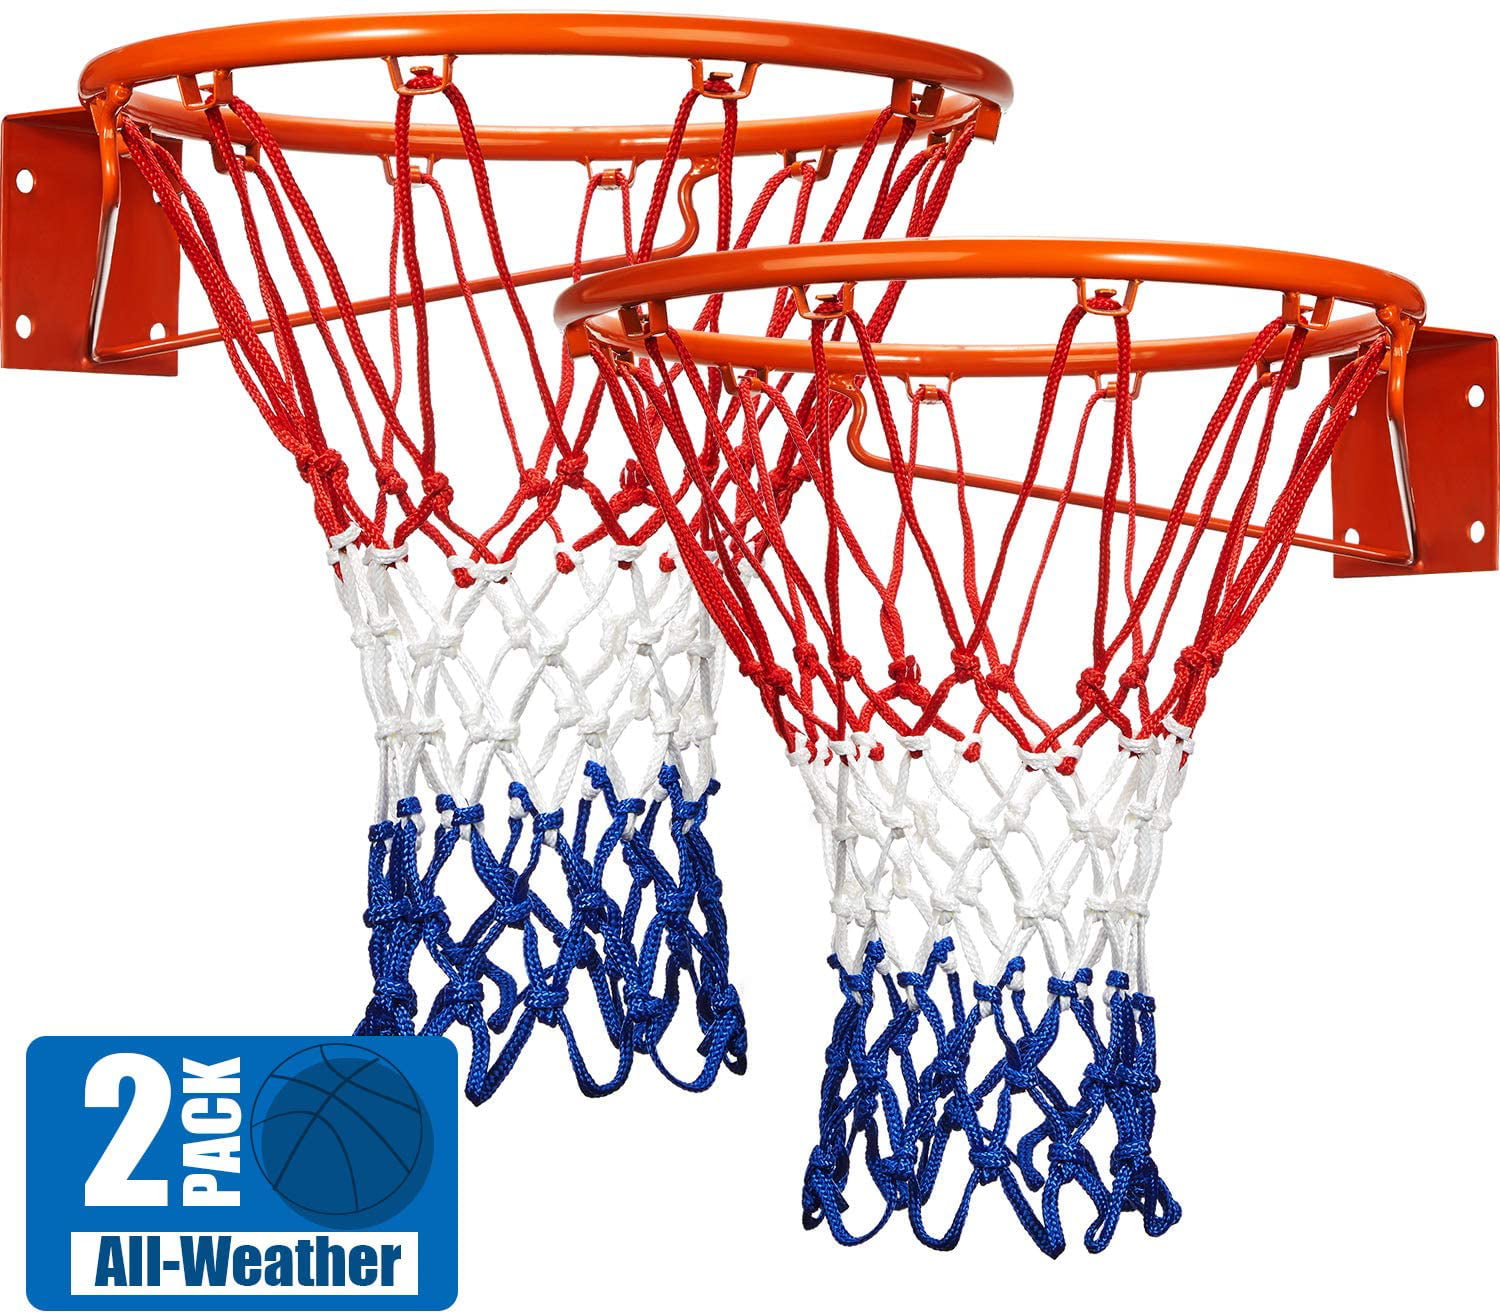 Fits Standard Indoor or Outdoor Rims All Weather Anti Whip Ultra Sporting Goods Heavy Duty Basketball Net Replacement 12 Loops 